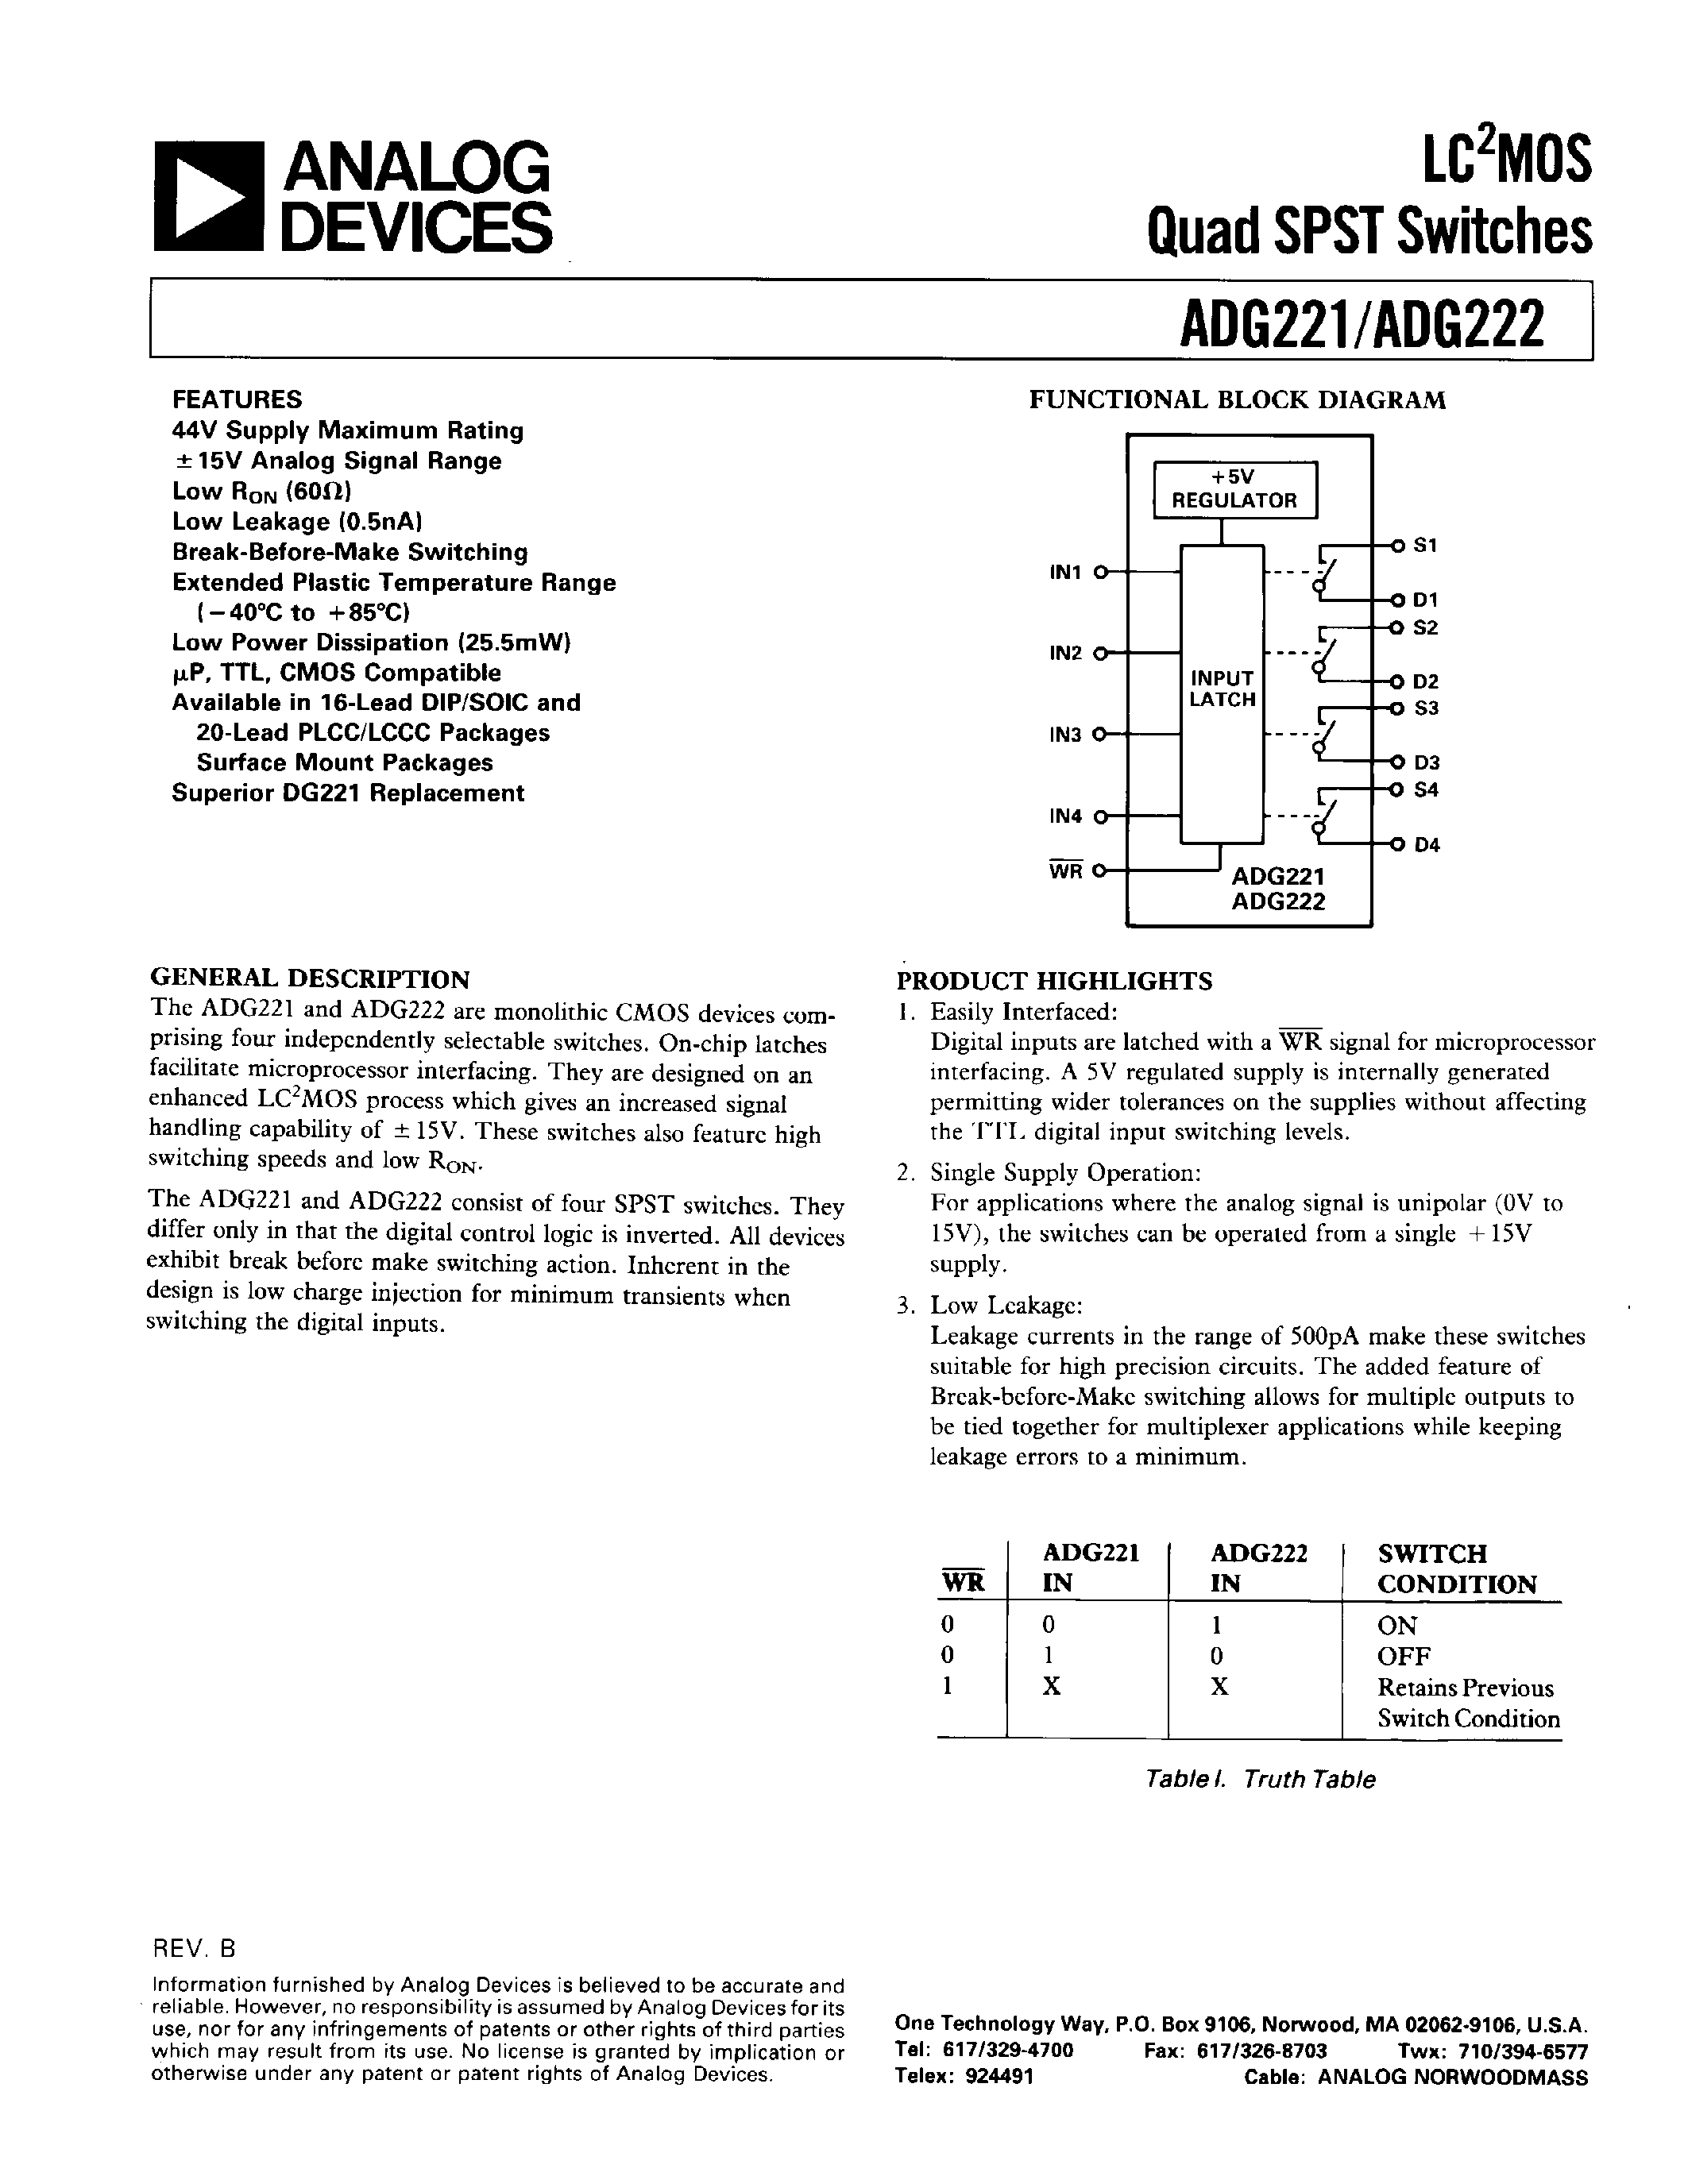 Datasheet ADG221 - LC2MOS QUAD SPST SWITCHES page 1